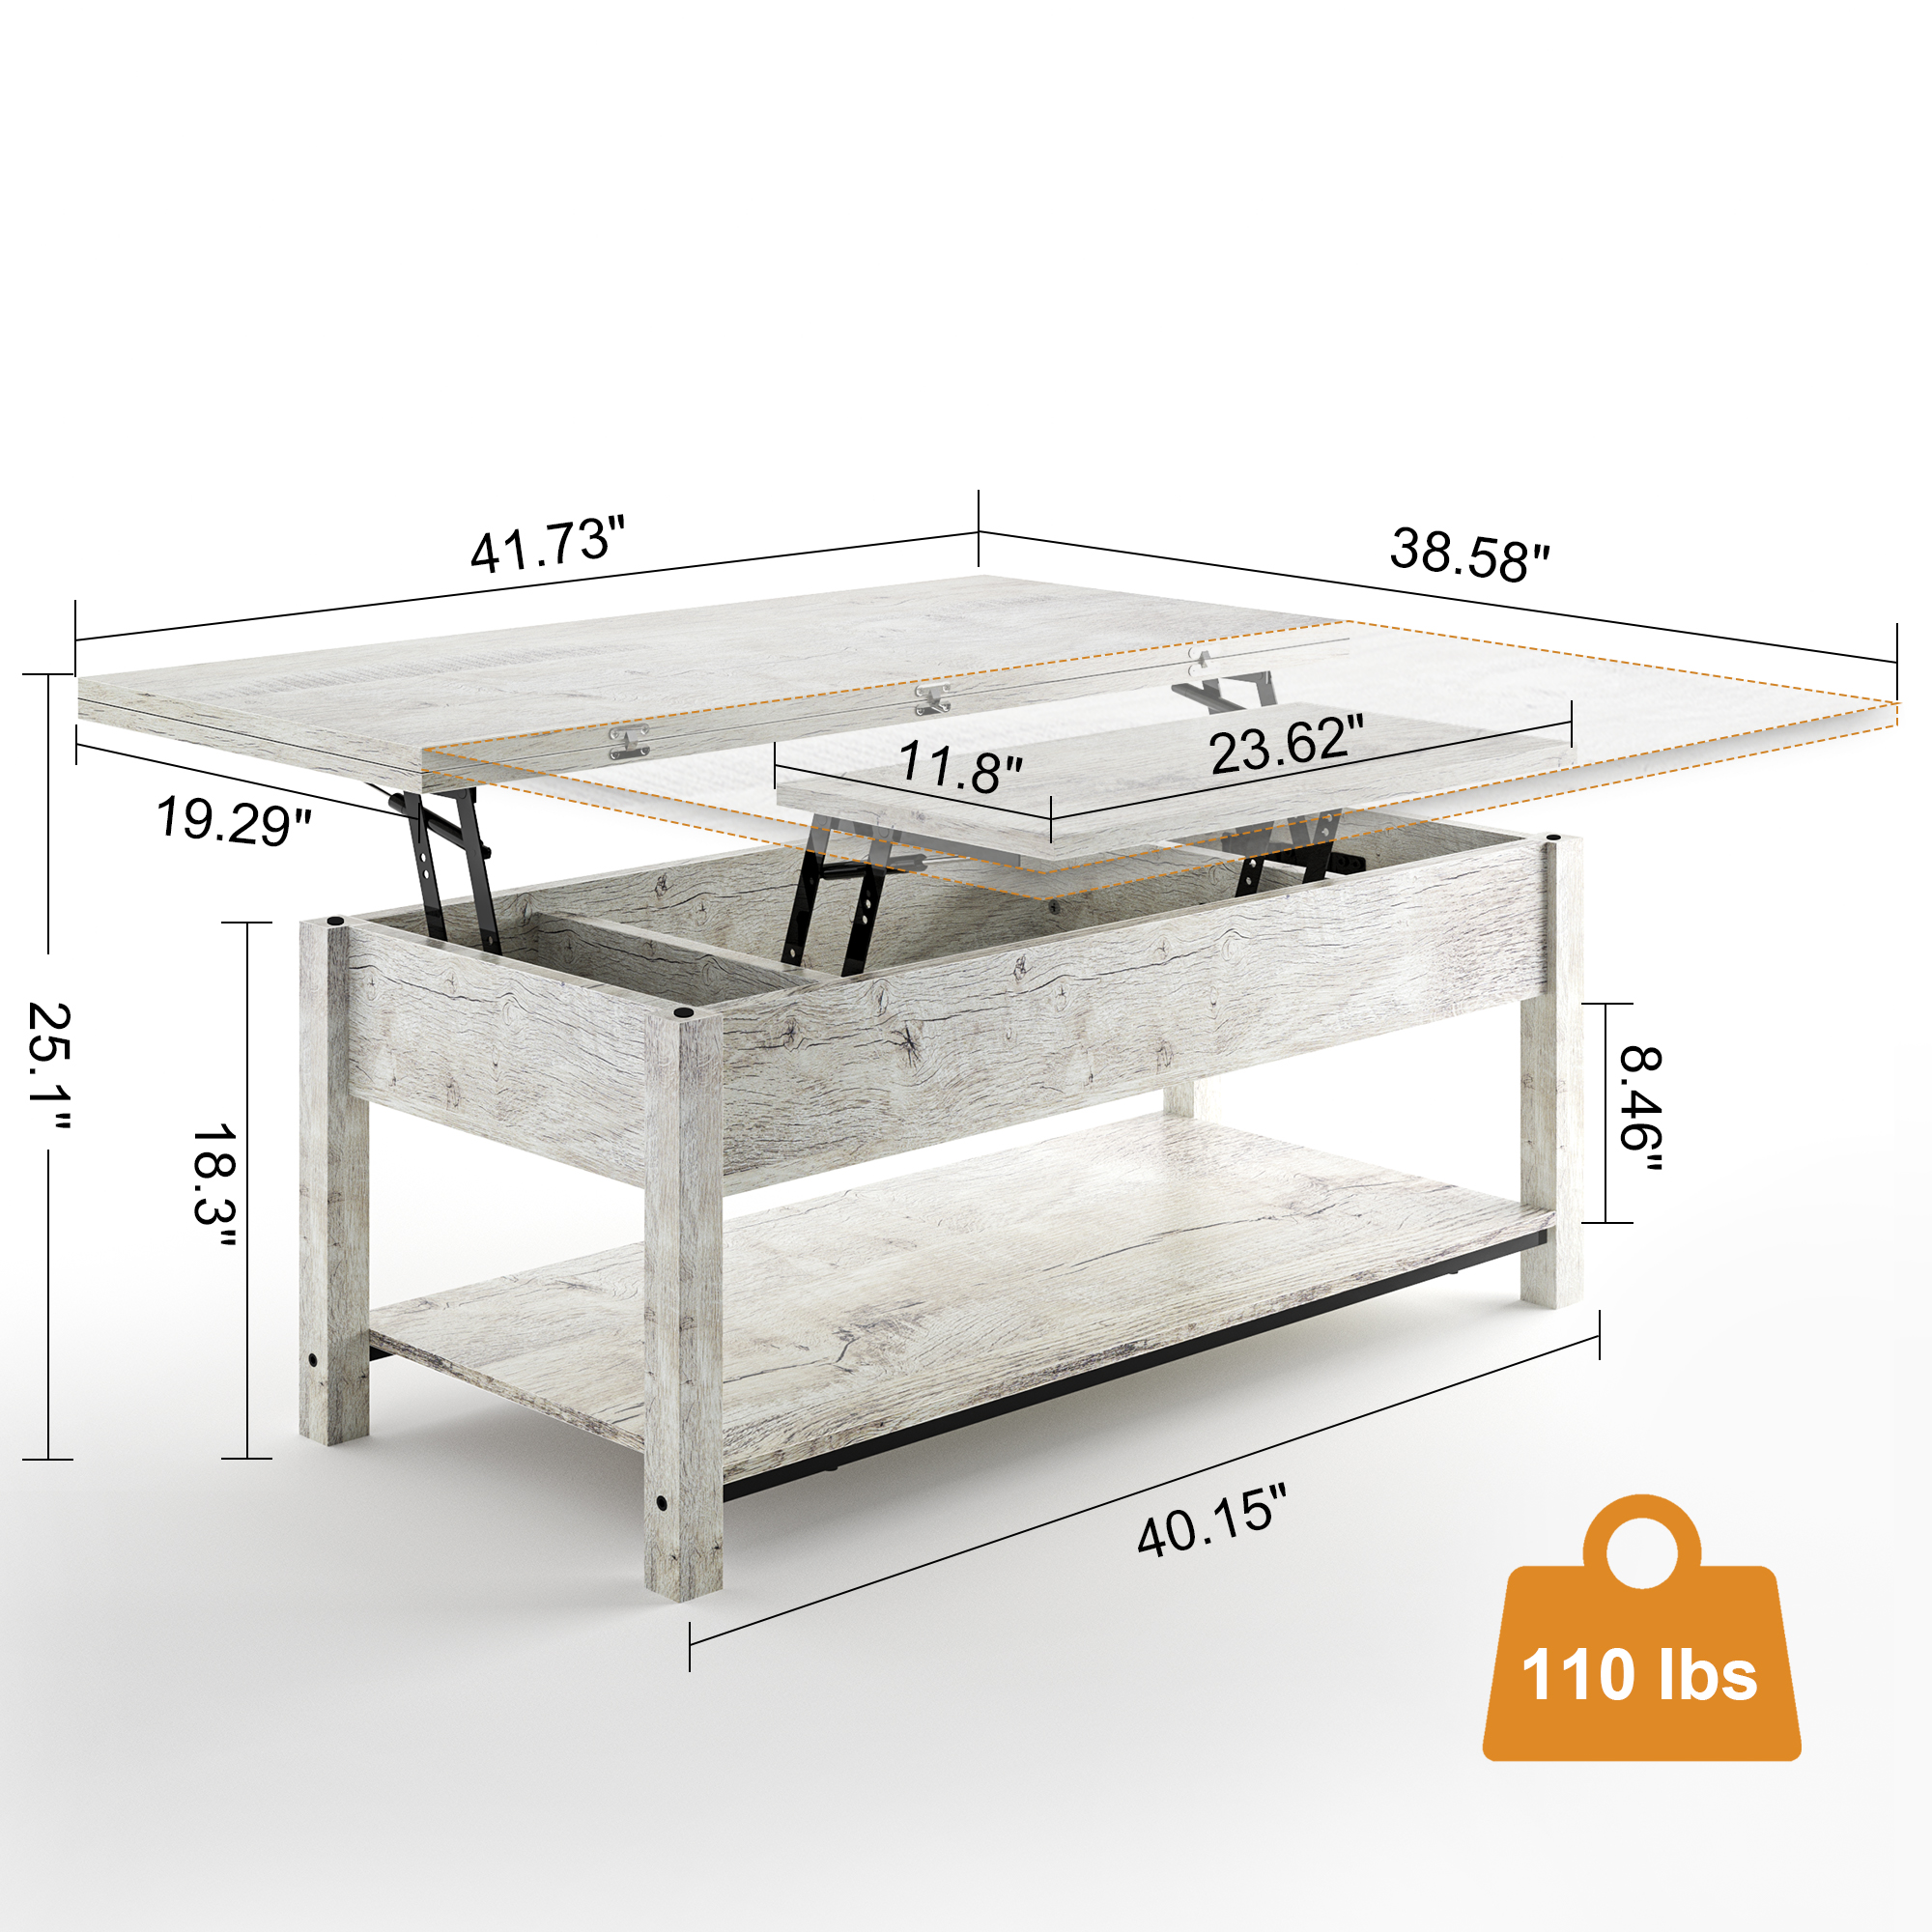 GUNAITO 41.73"Lift Top Coffee Table 4 in 1 Multi-Function Convertible Coffee Table with Storage Modern Coffee Table Converts to Dining Table for Living Room Grey - image 5 of 8